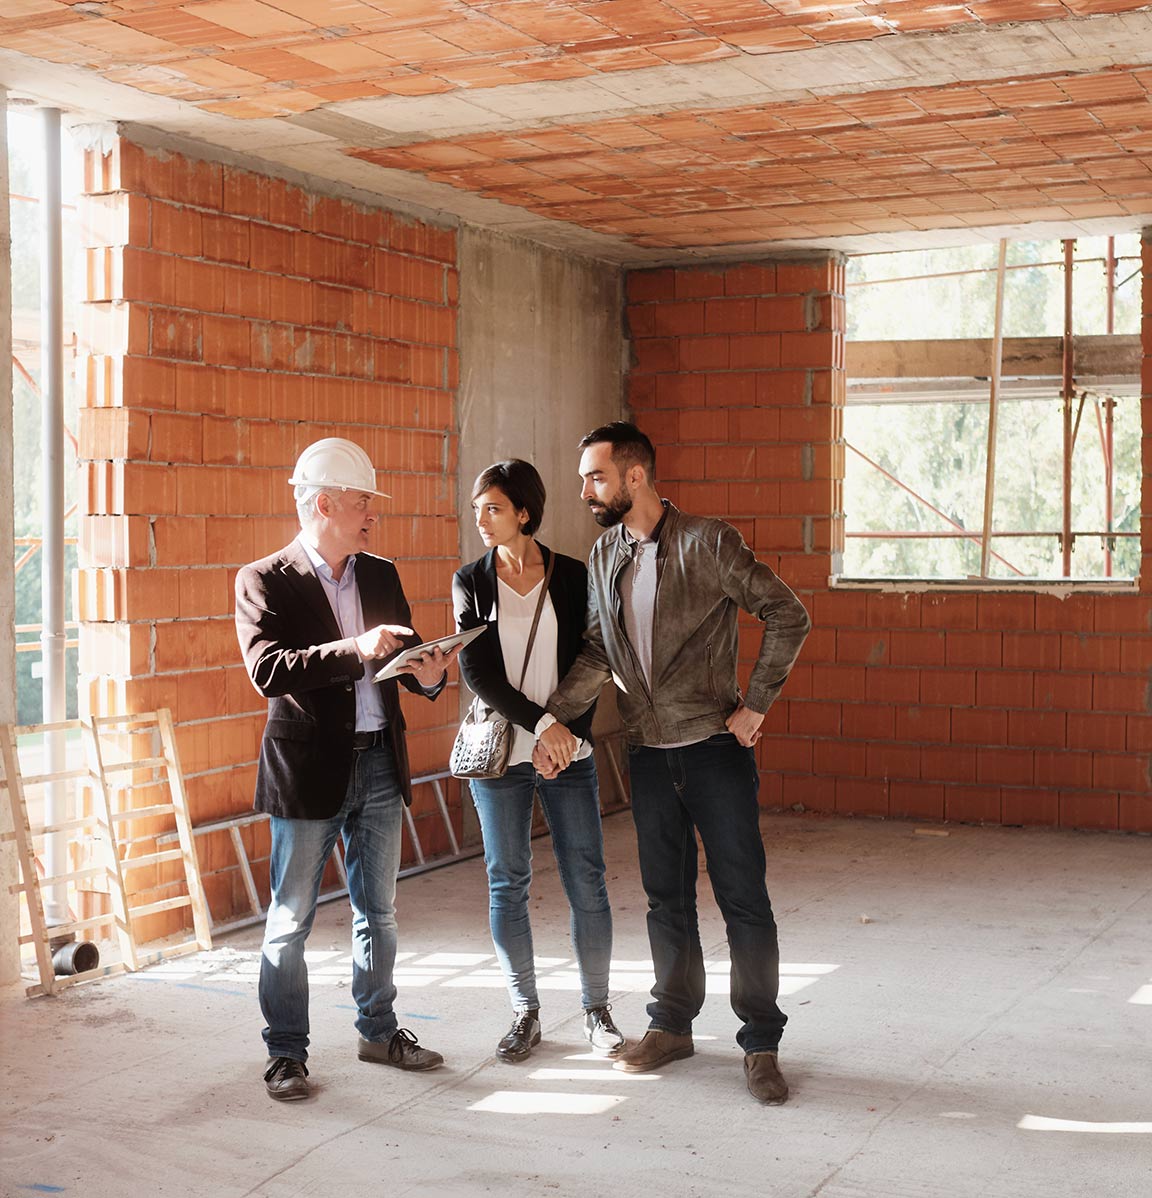 A builder meets with prospective owners